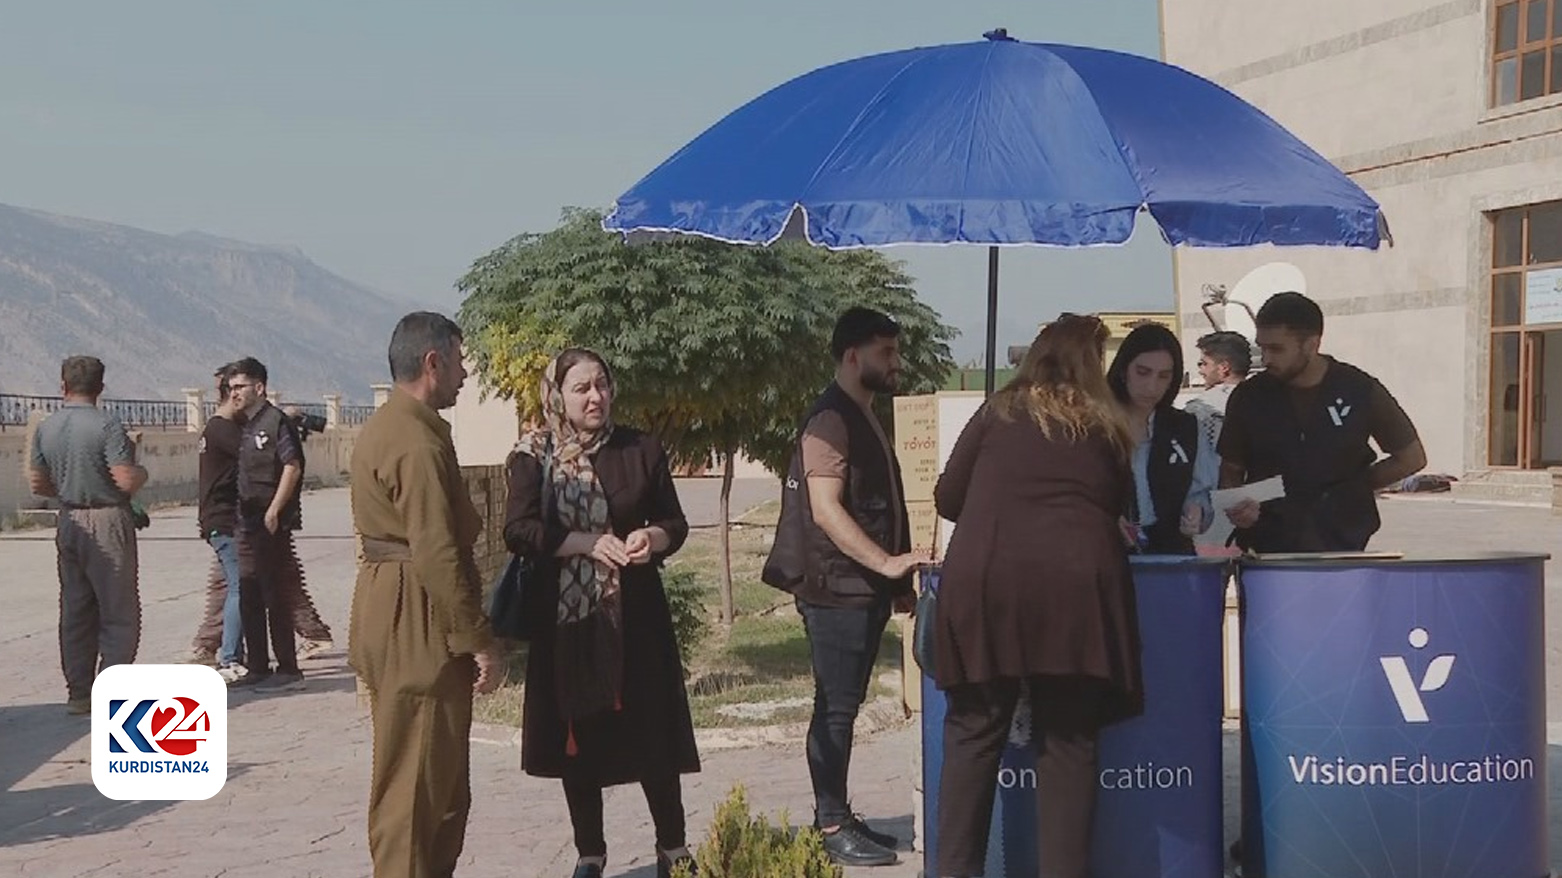 Representatives of Vision Education speaking to clients at a booth, Oct. 28, 2023. (Photo: Kurdistan 24)